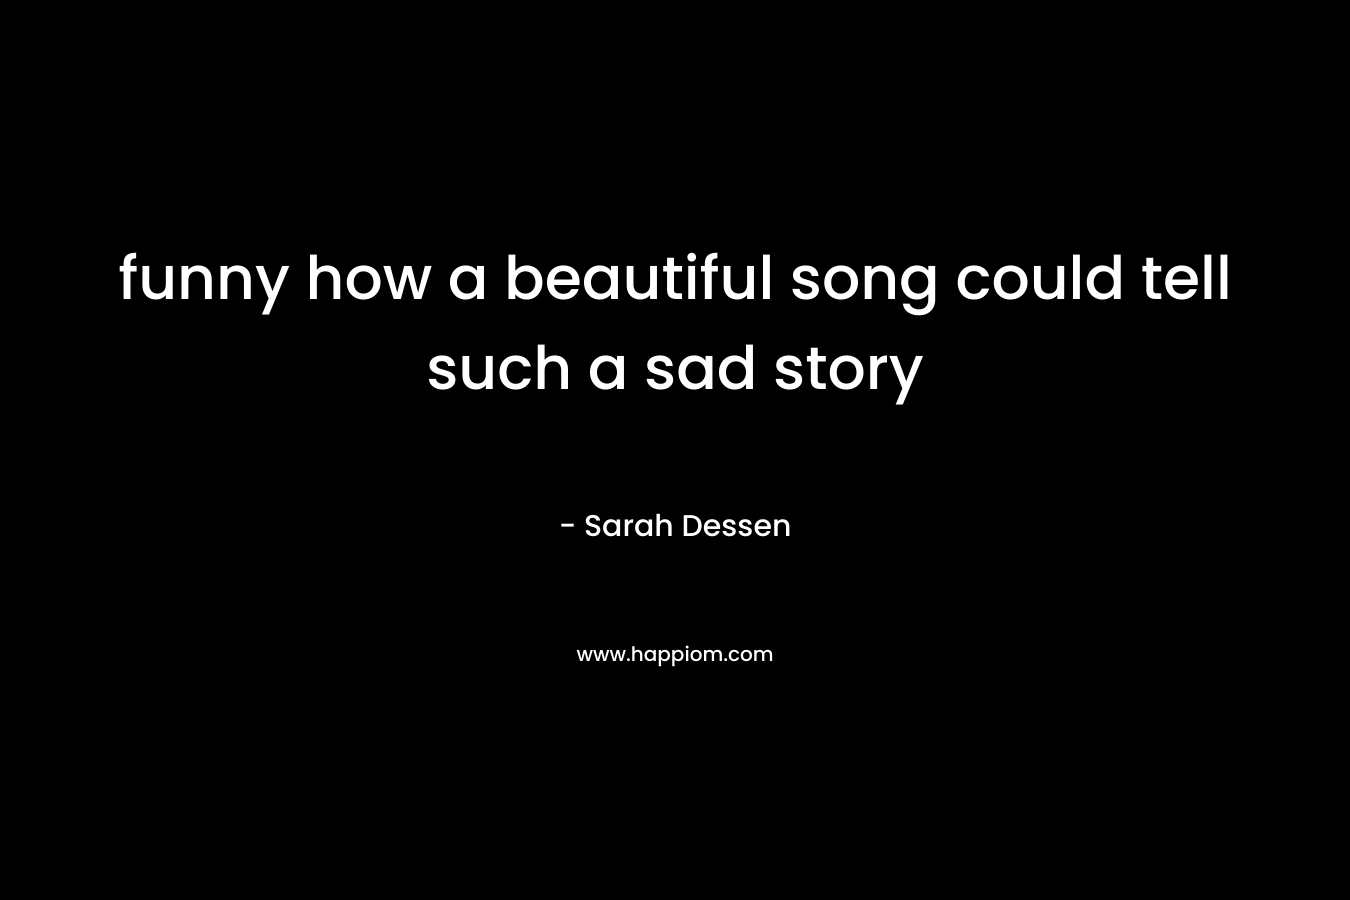 funny how a beautiful song could tell such a sad story